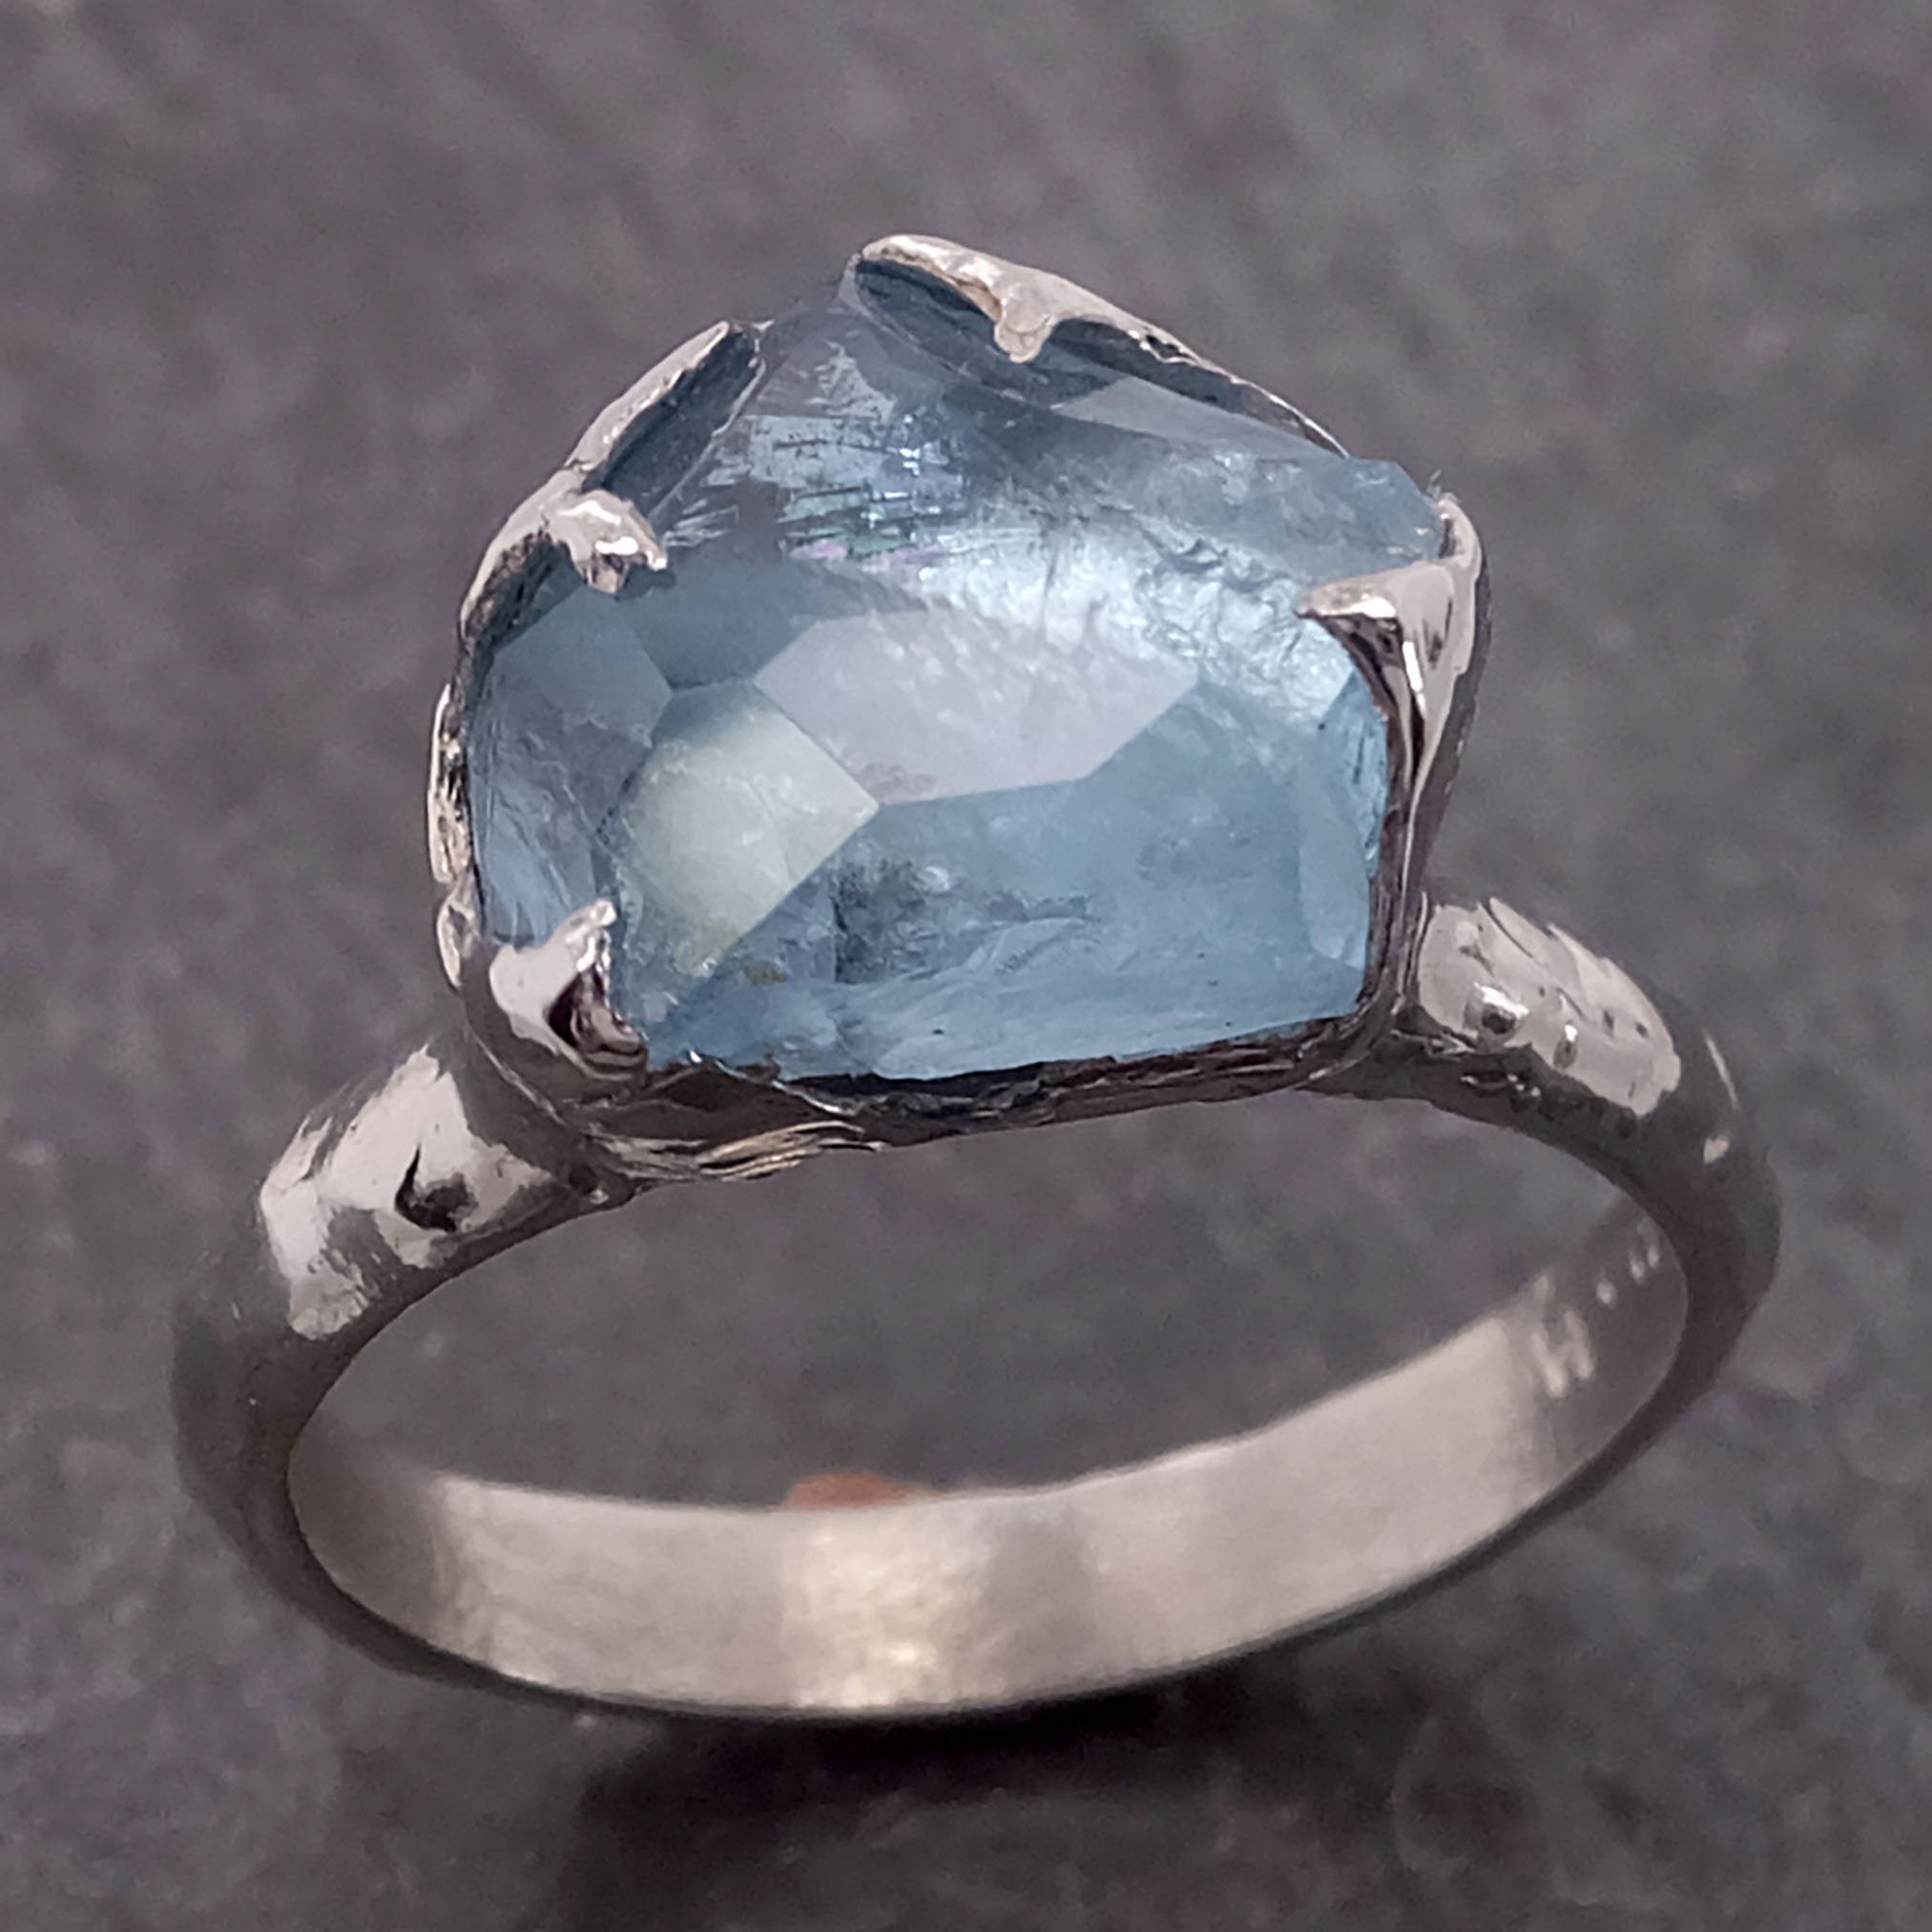 partially faceted aquamarine white 18k gold solitaire ring statement wedding ring one of a kind gemstone ring bespoke 2130 Alternative Engagement